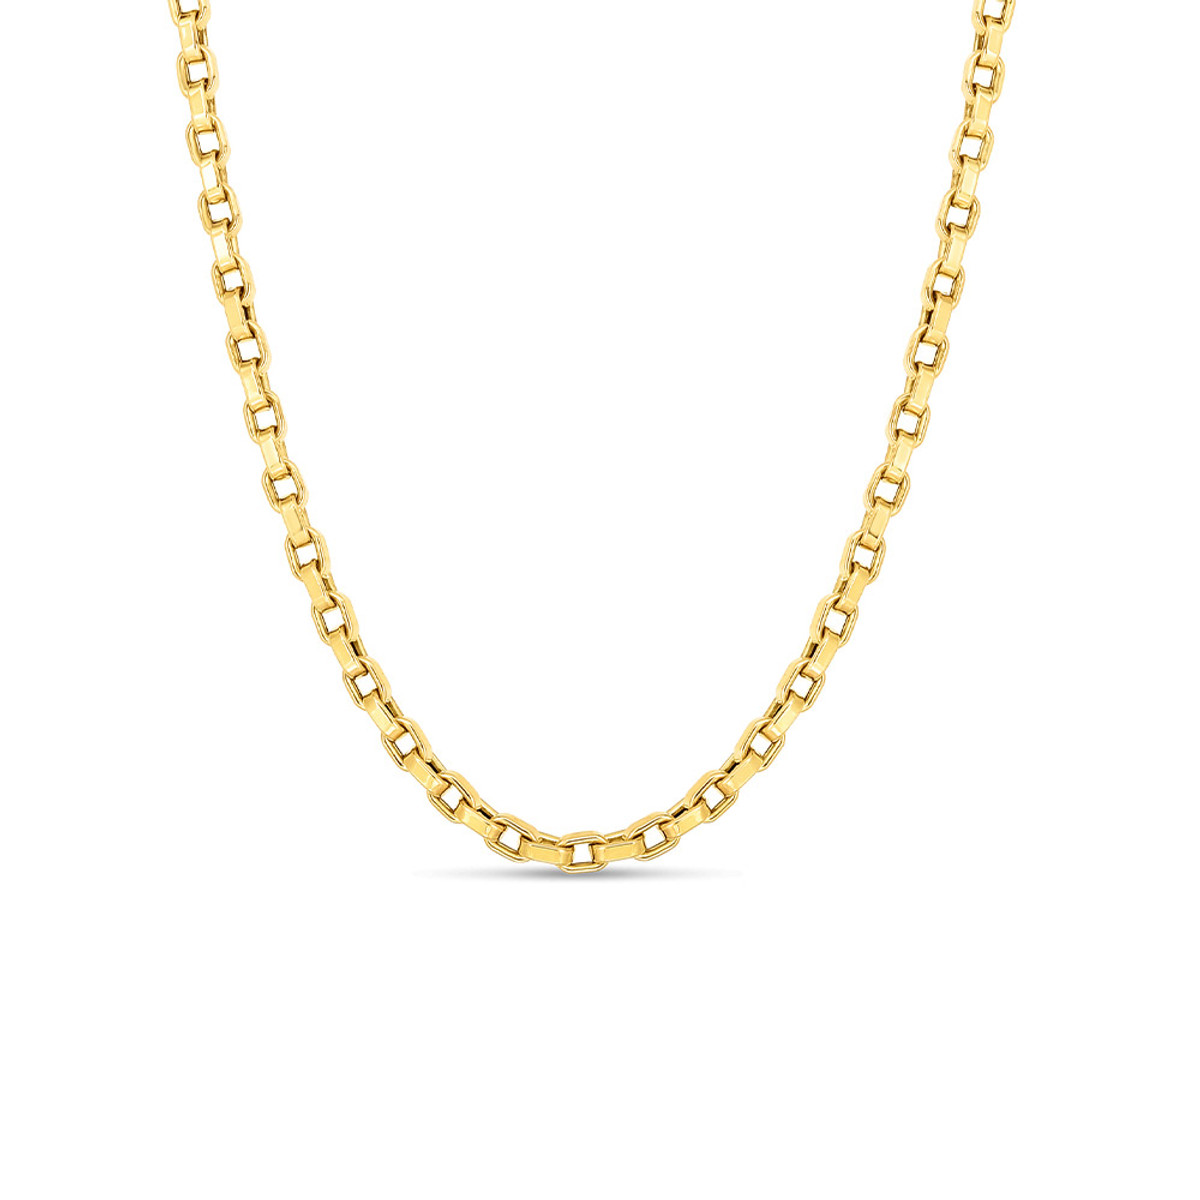 Roberto Coin 18K Yellow Gold Designer Gold Square Link Chain Necklace-51977 Product Image